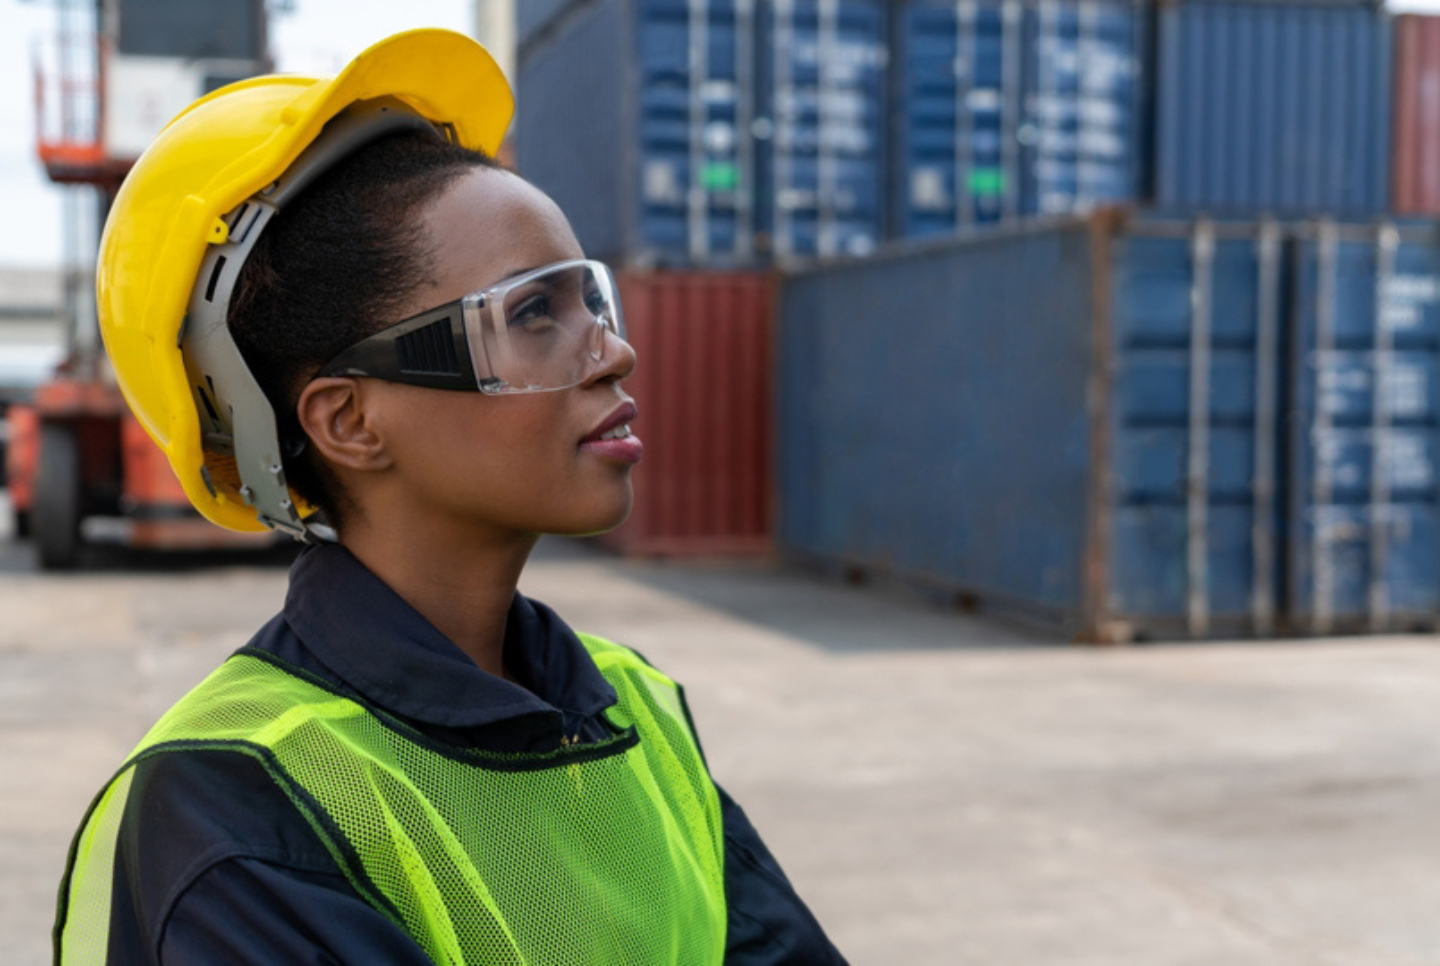 Woman standing in shipyard with hardhat and goggles. Women comprise 41% of the supply chain workforce in 2021.